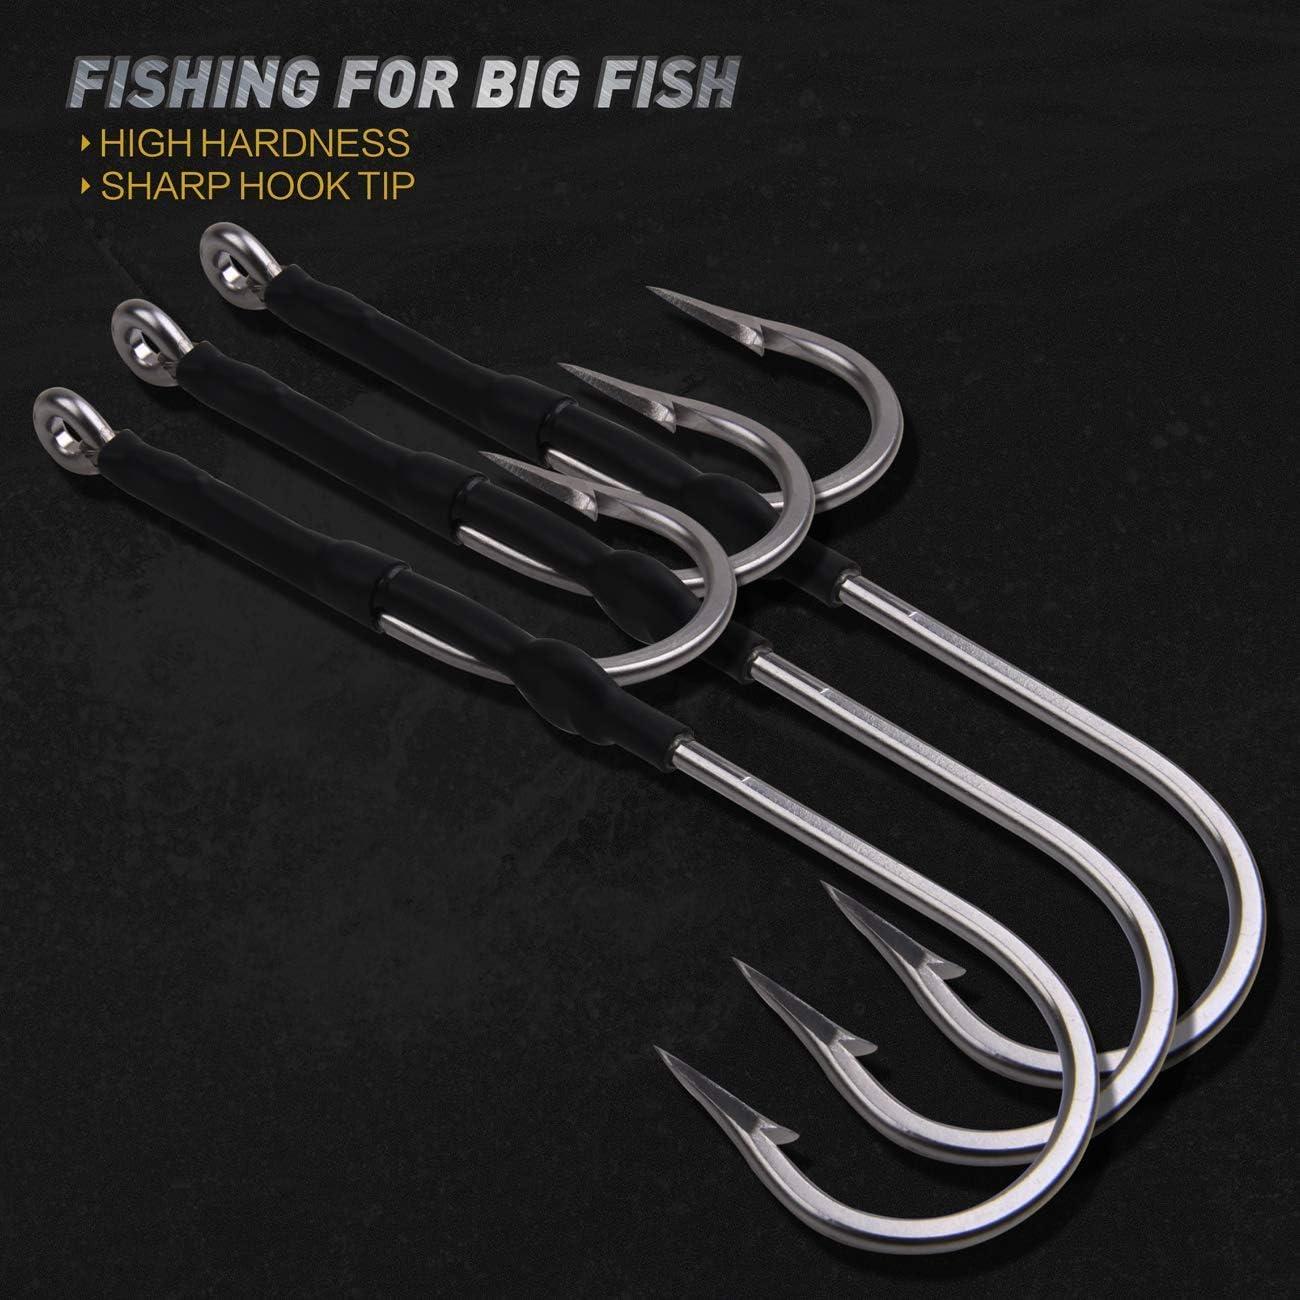 OROOTL Double Hook Rig for Trolling and Chunking Saltwater Double Trolling Hooks  Big Game Forged Stainless Steel Double Hooks for Tuna Marlin Wahoo Dorado  Fishing 11/0-3pcs